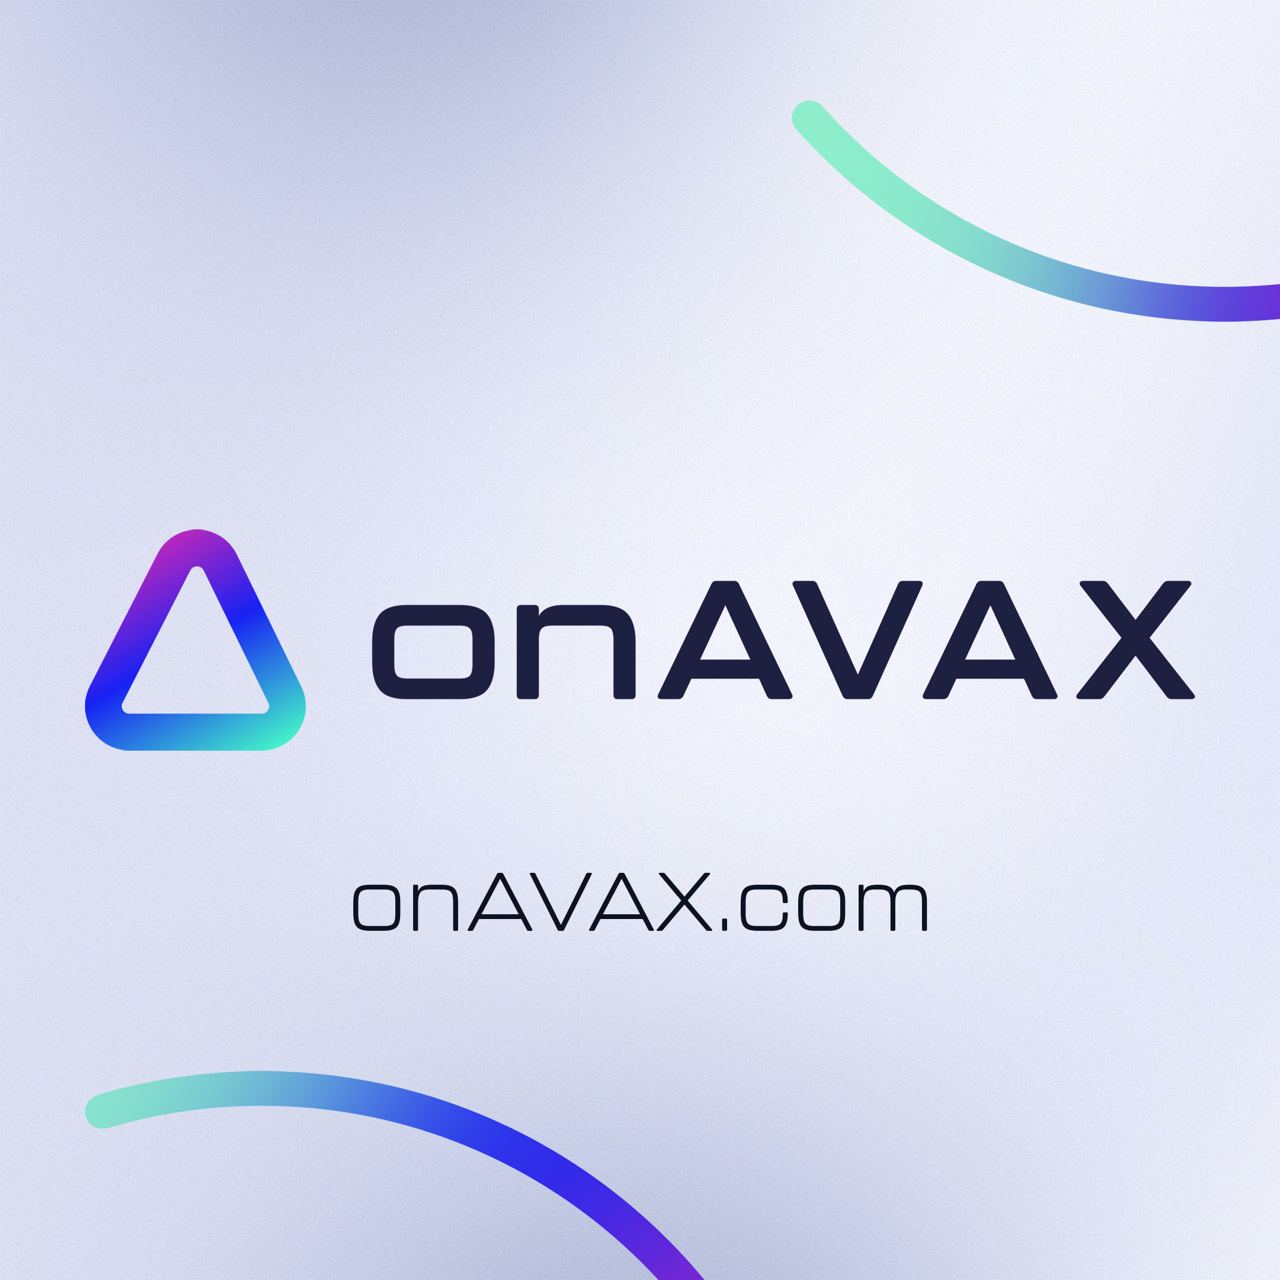 Swapsicle is proud to announce its first airdrop and its partnership with onXRP to bring onAVAX to the community!